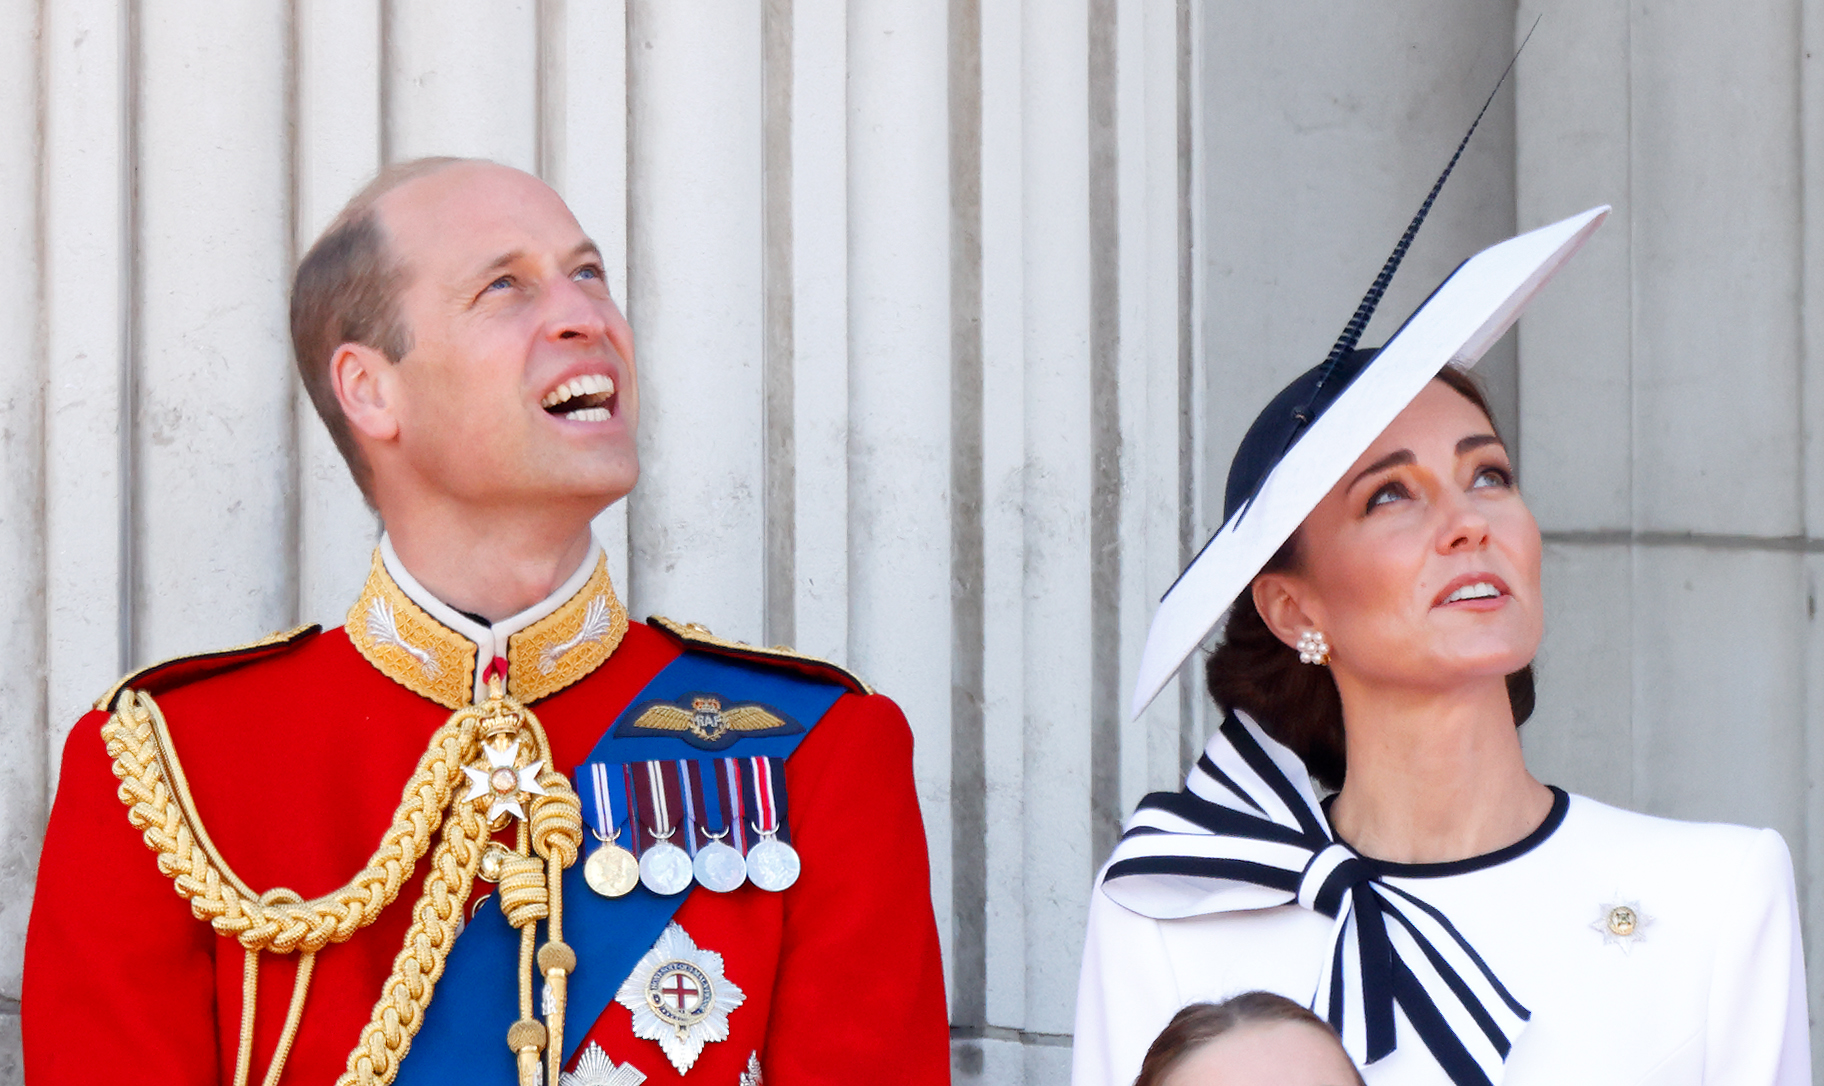 Prince William, Prince of Wales and Catherine, Princess of Wales on the balcony of Buckingham Palace attending Trooping the Colour in London, England, on June 15, 2024. | Source: Getty Images